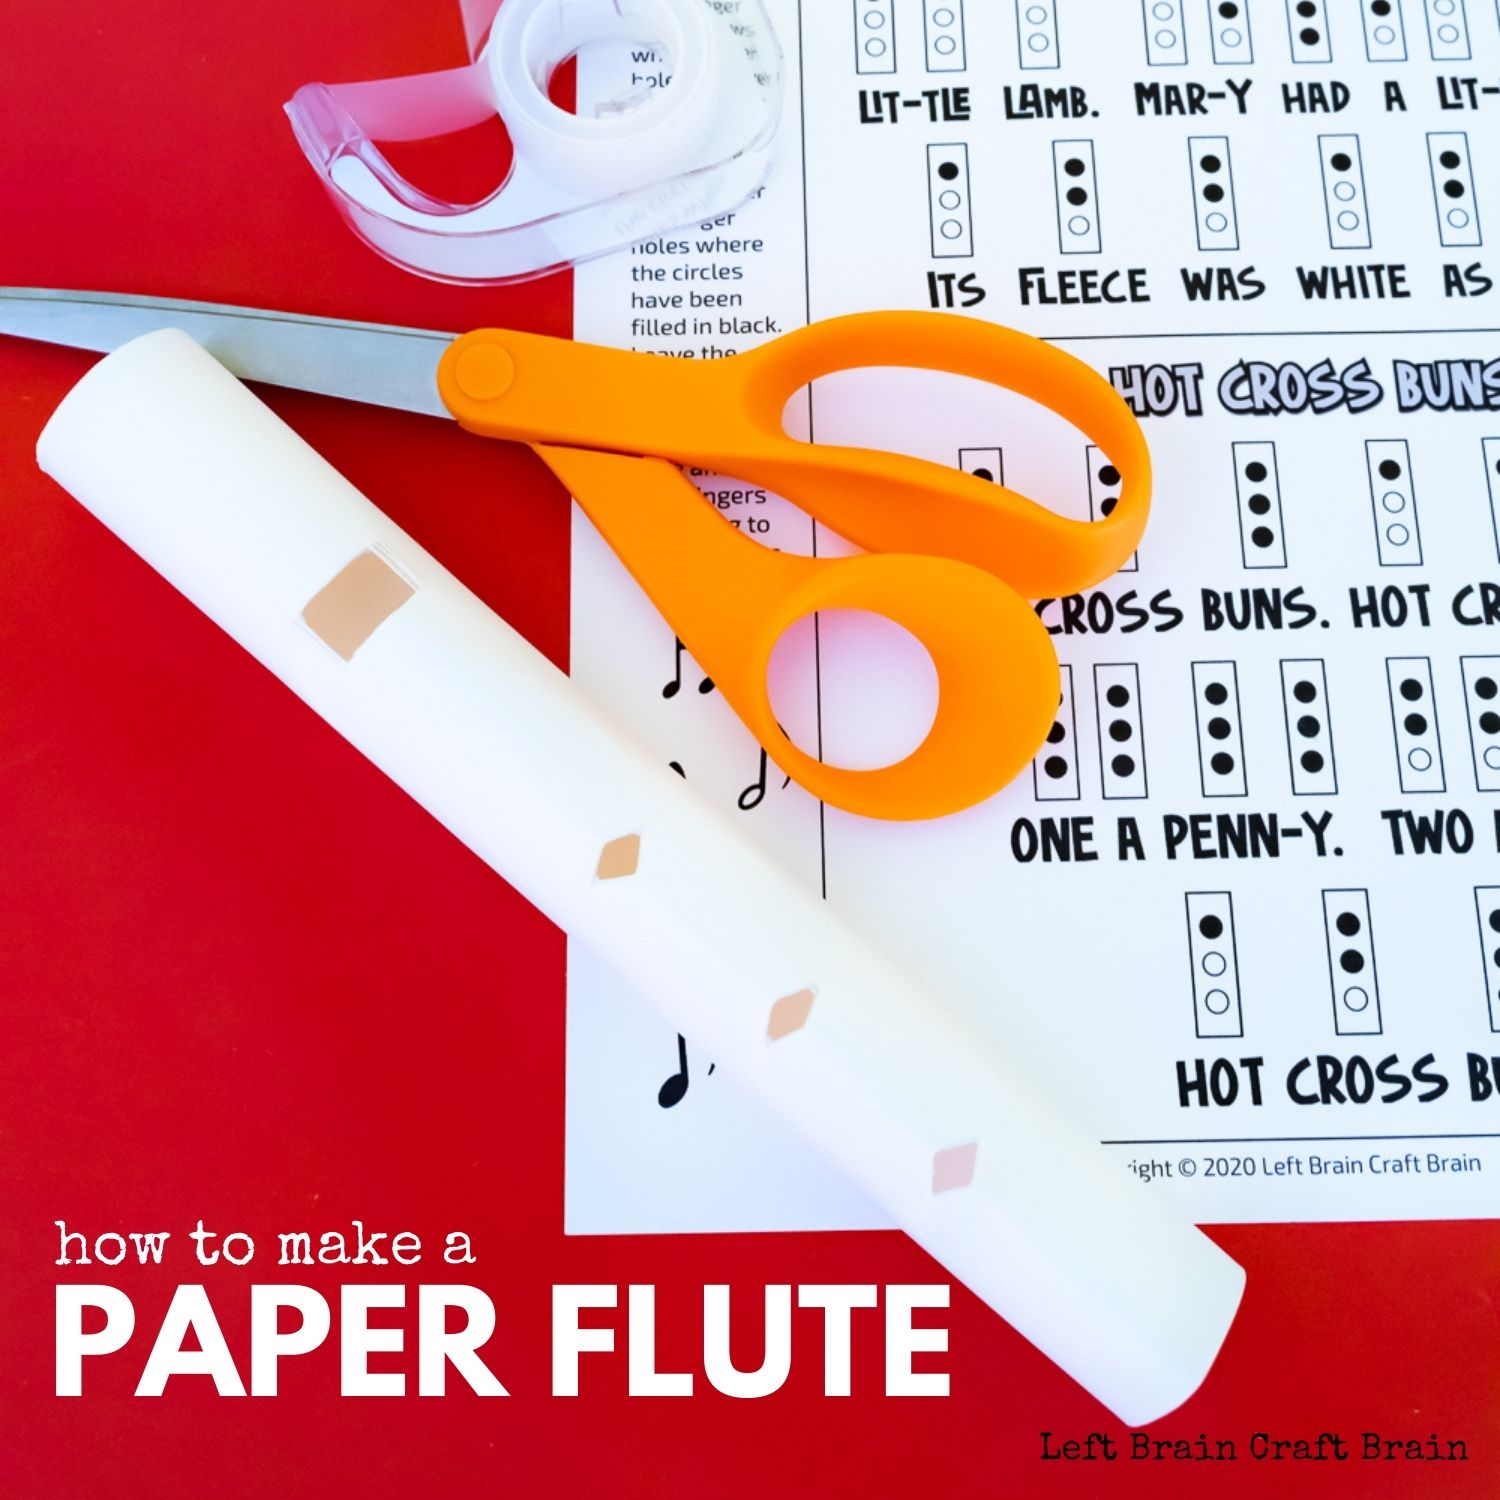 how-to-make-a-paper-flute-1500x1500-1